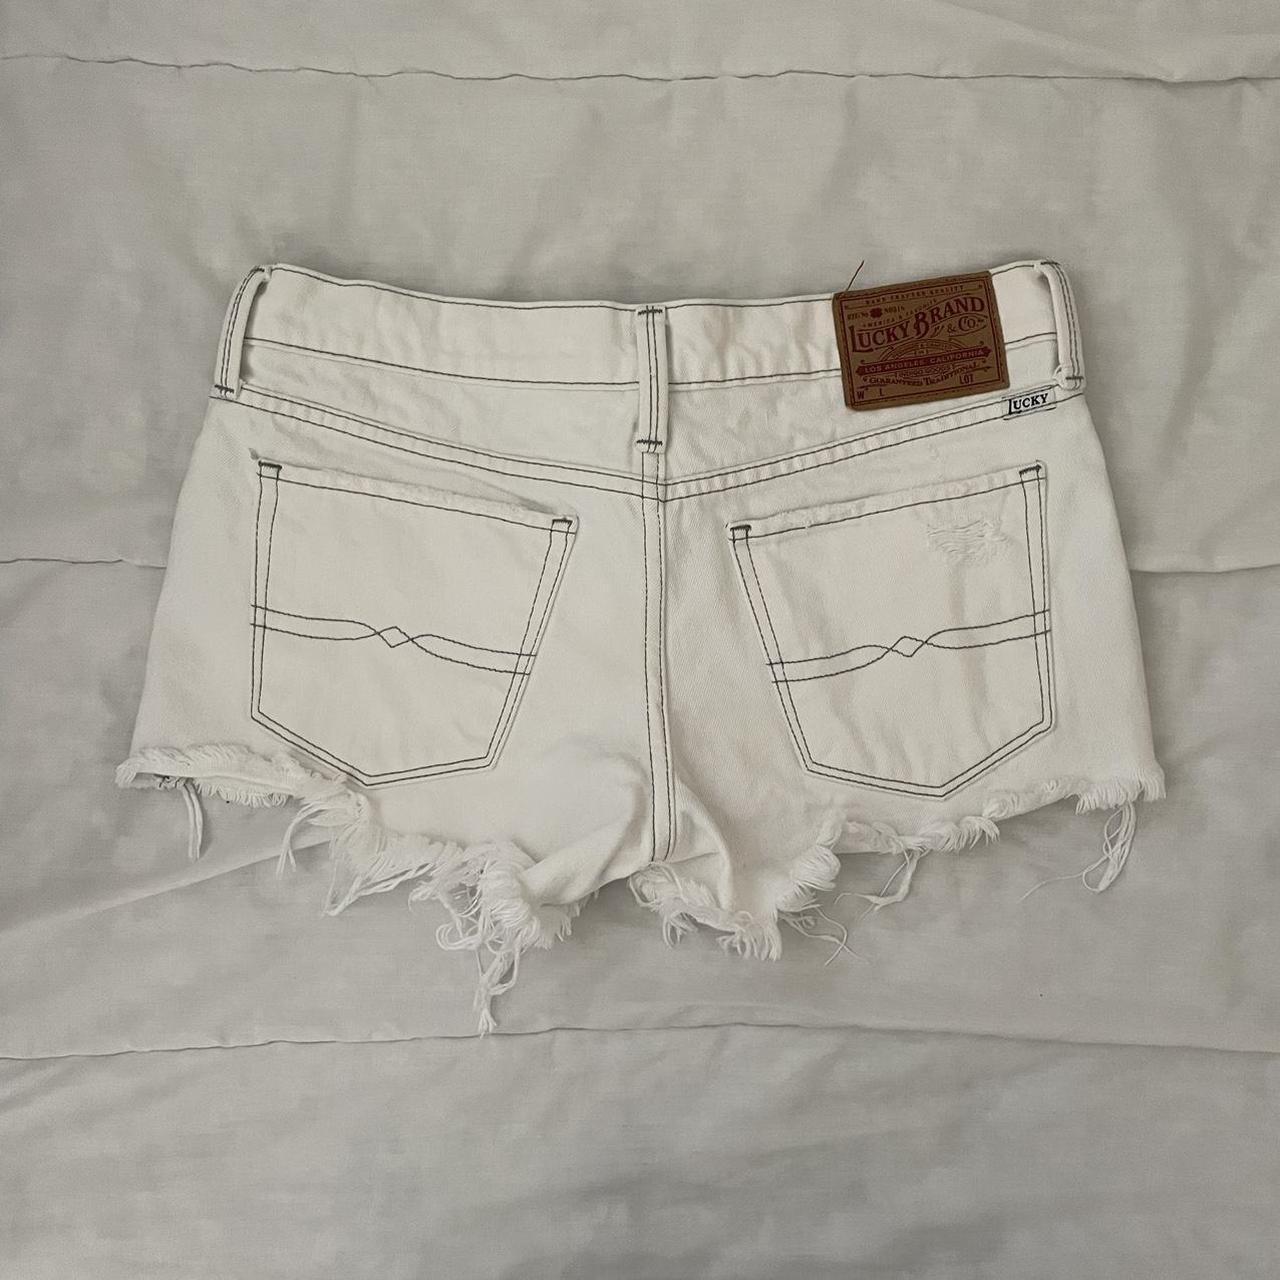 Lucky brand shorts | The Cut Off Shorts, White denim